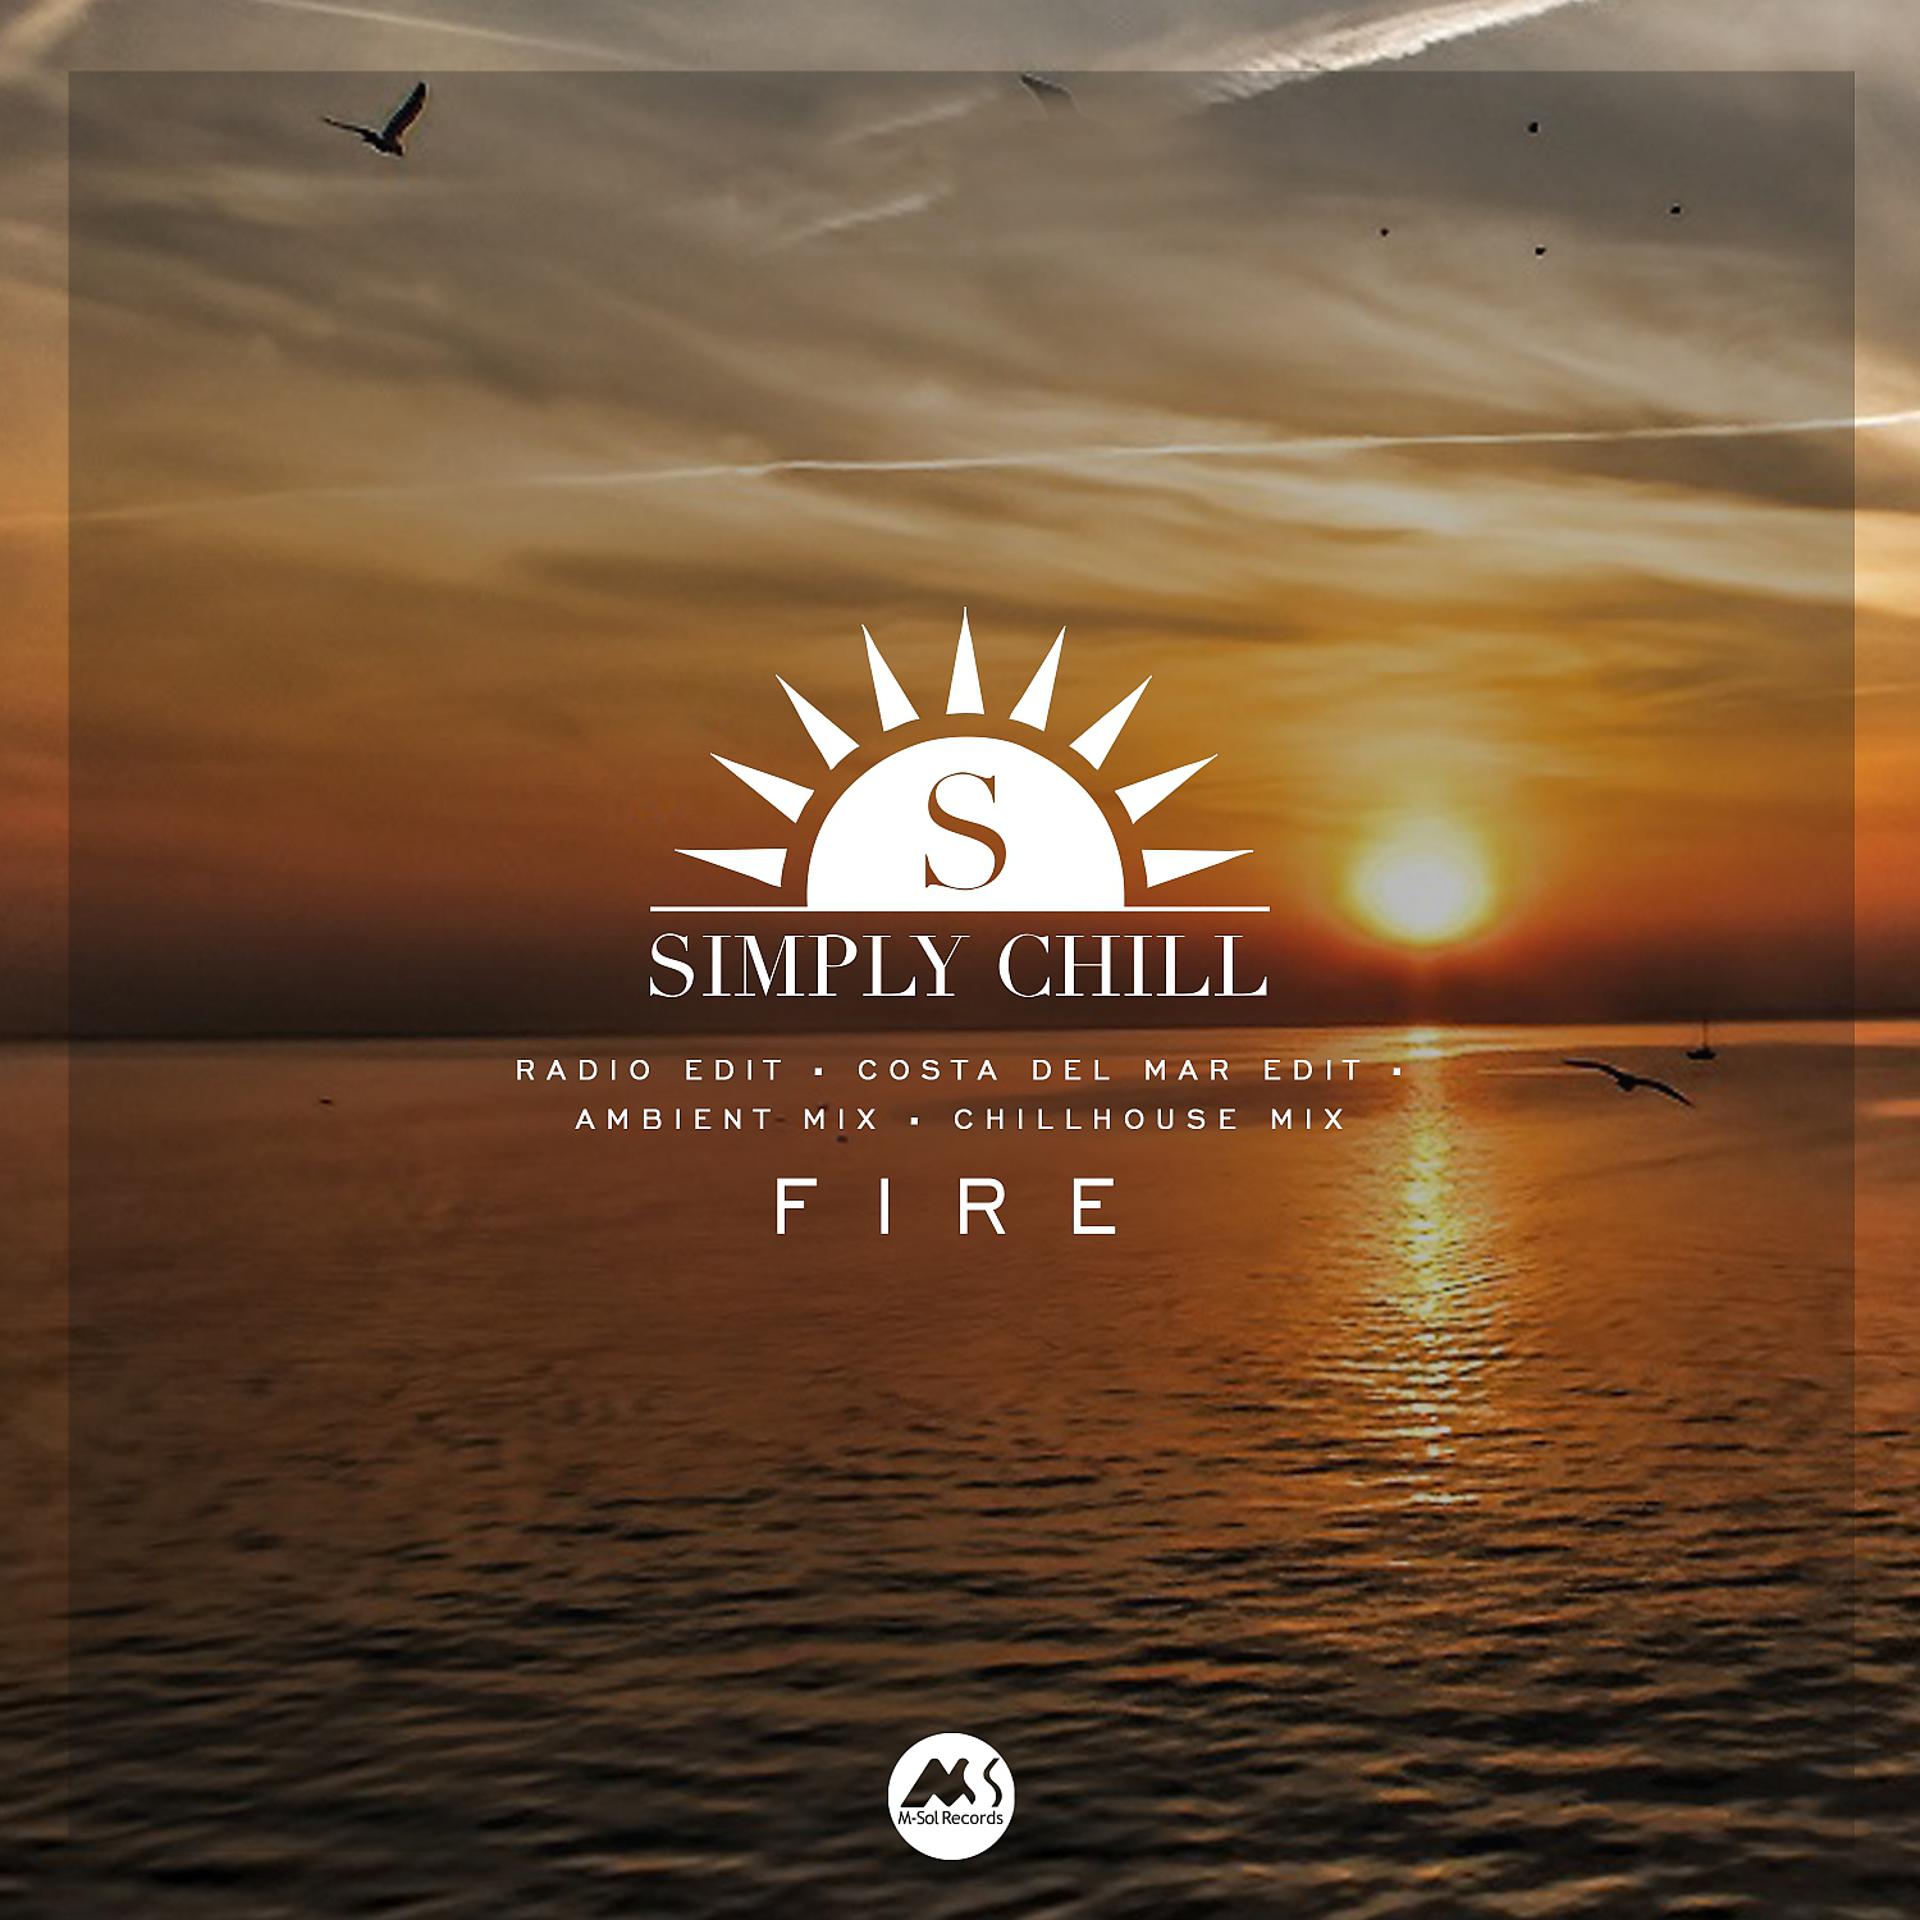 Simple Chill. Fire simple. Chilly simply